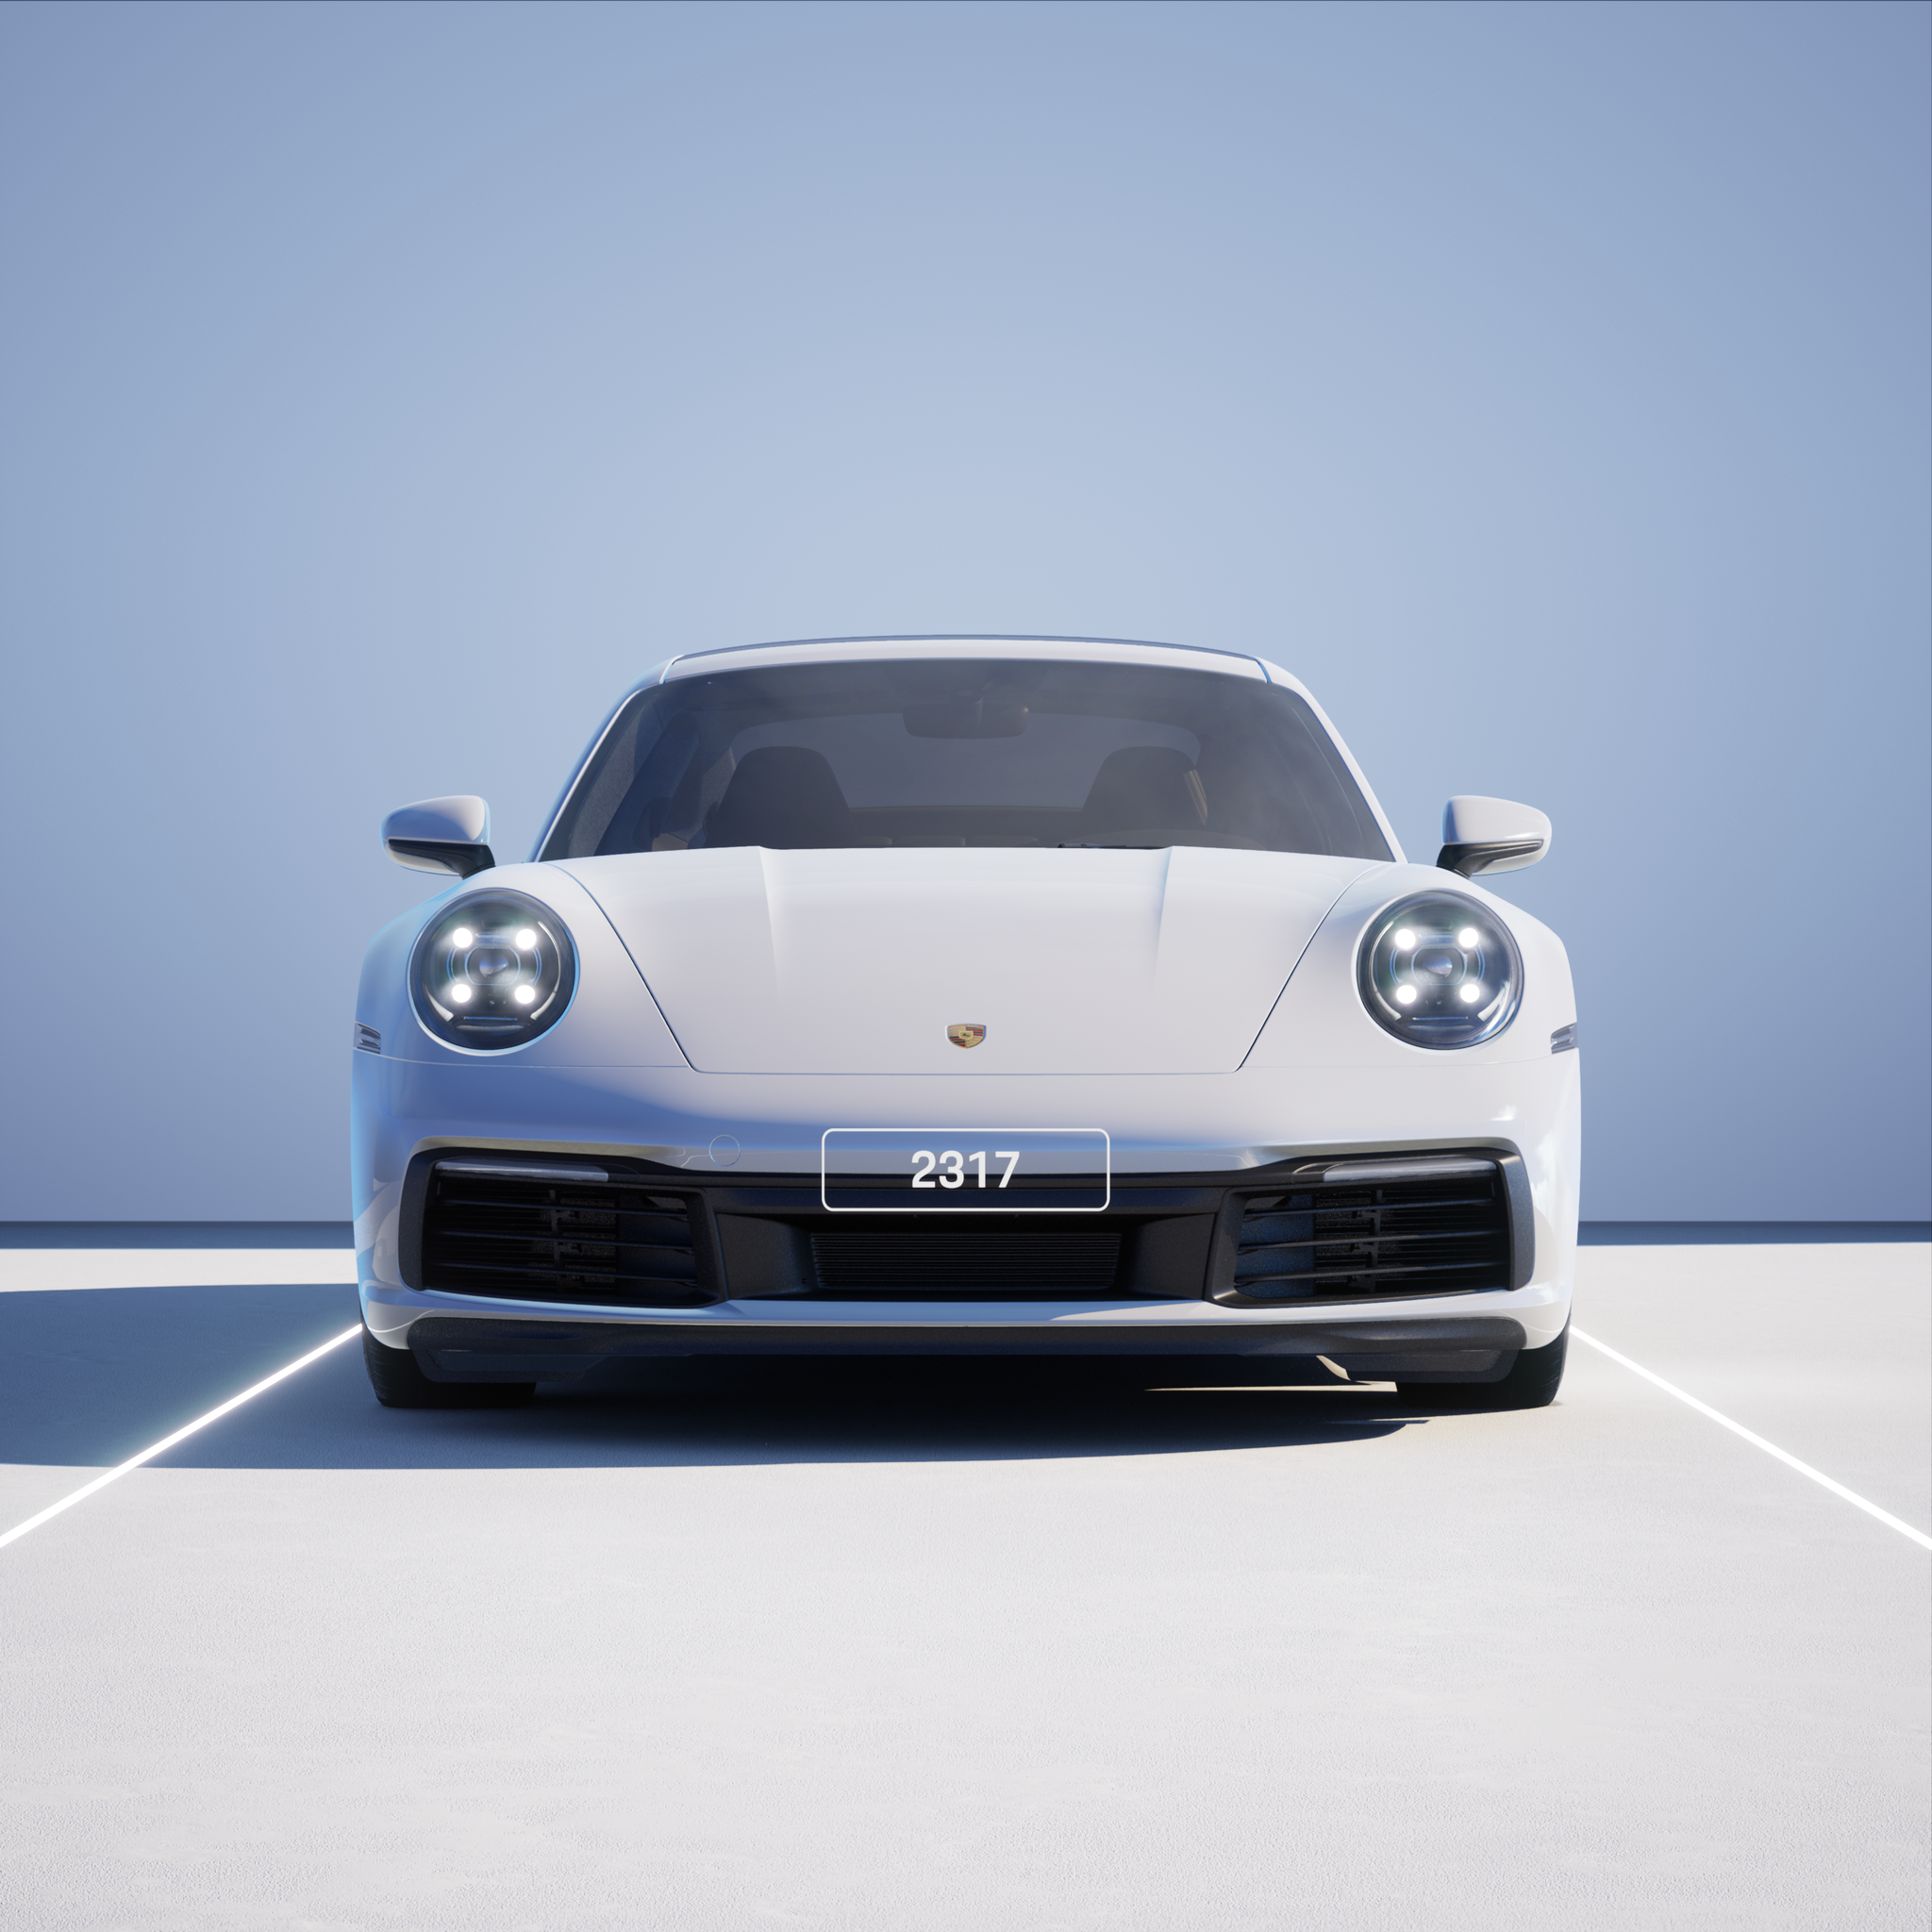 The PORSCHΞ 911 2317 image in phase